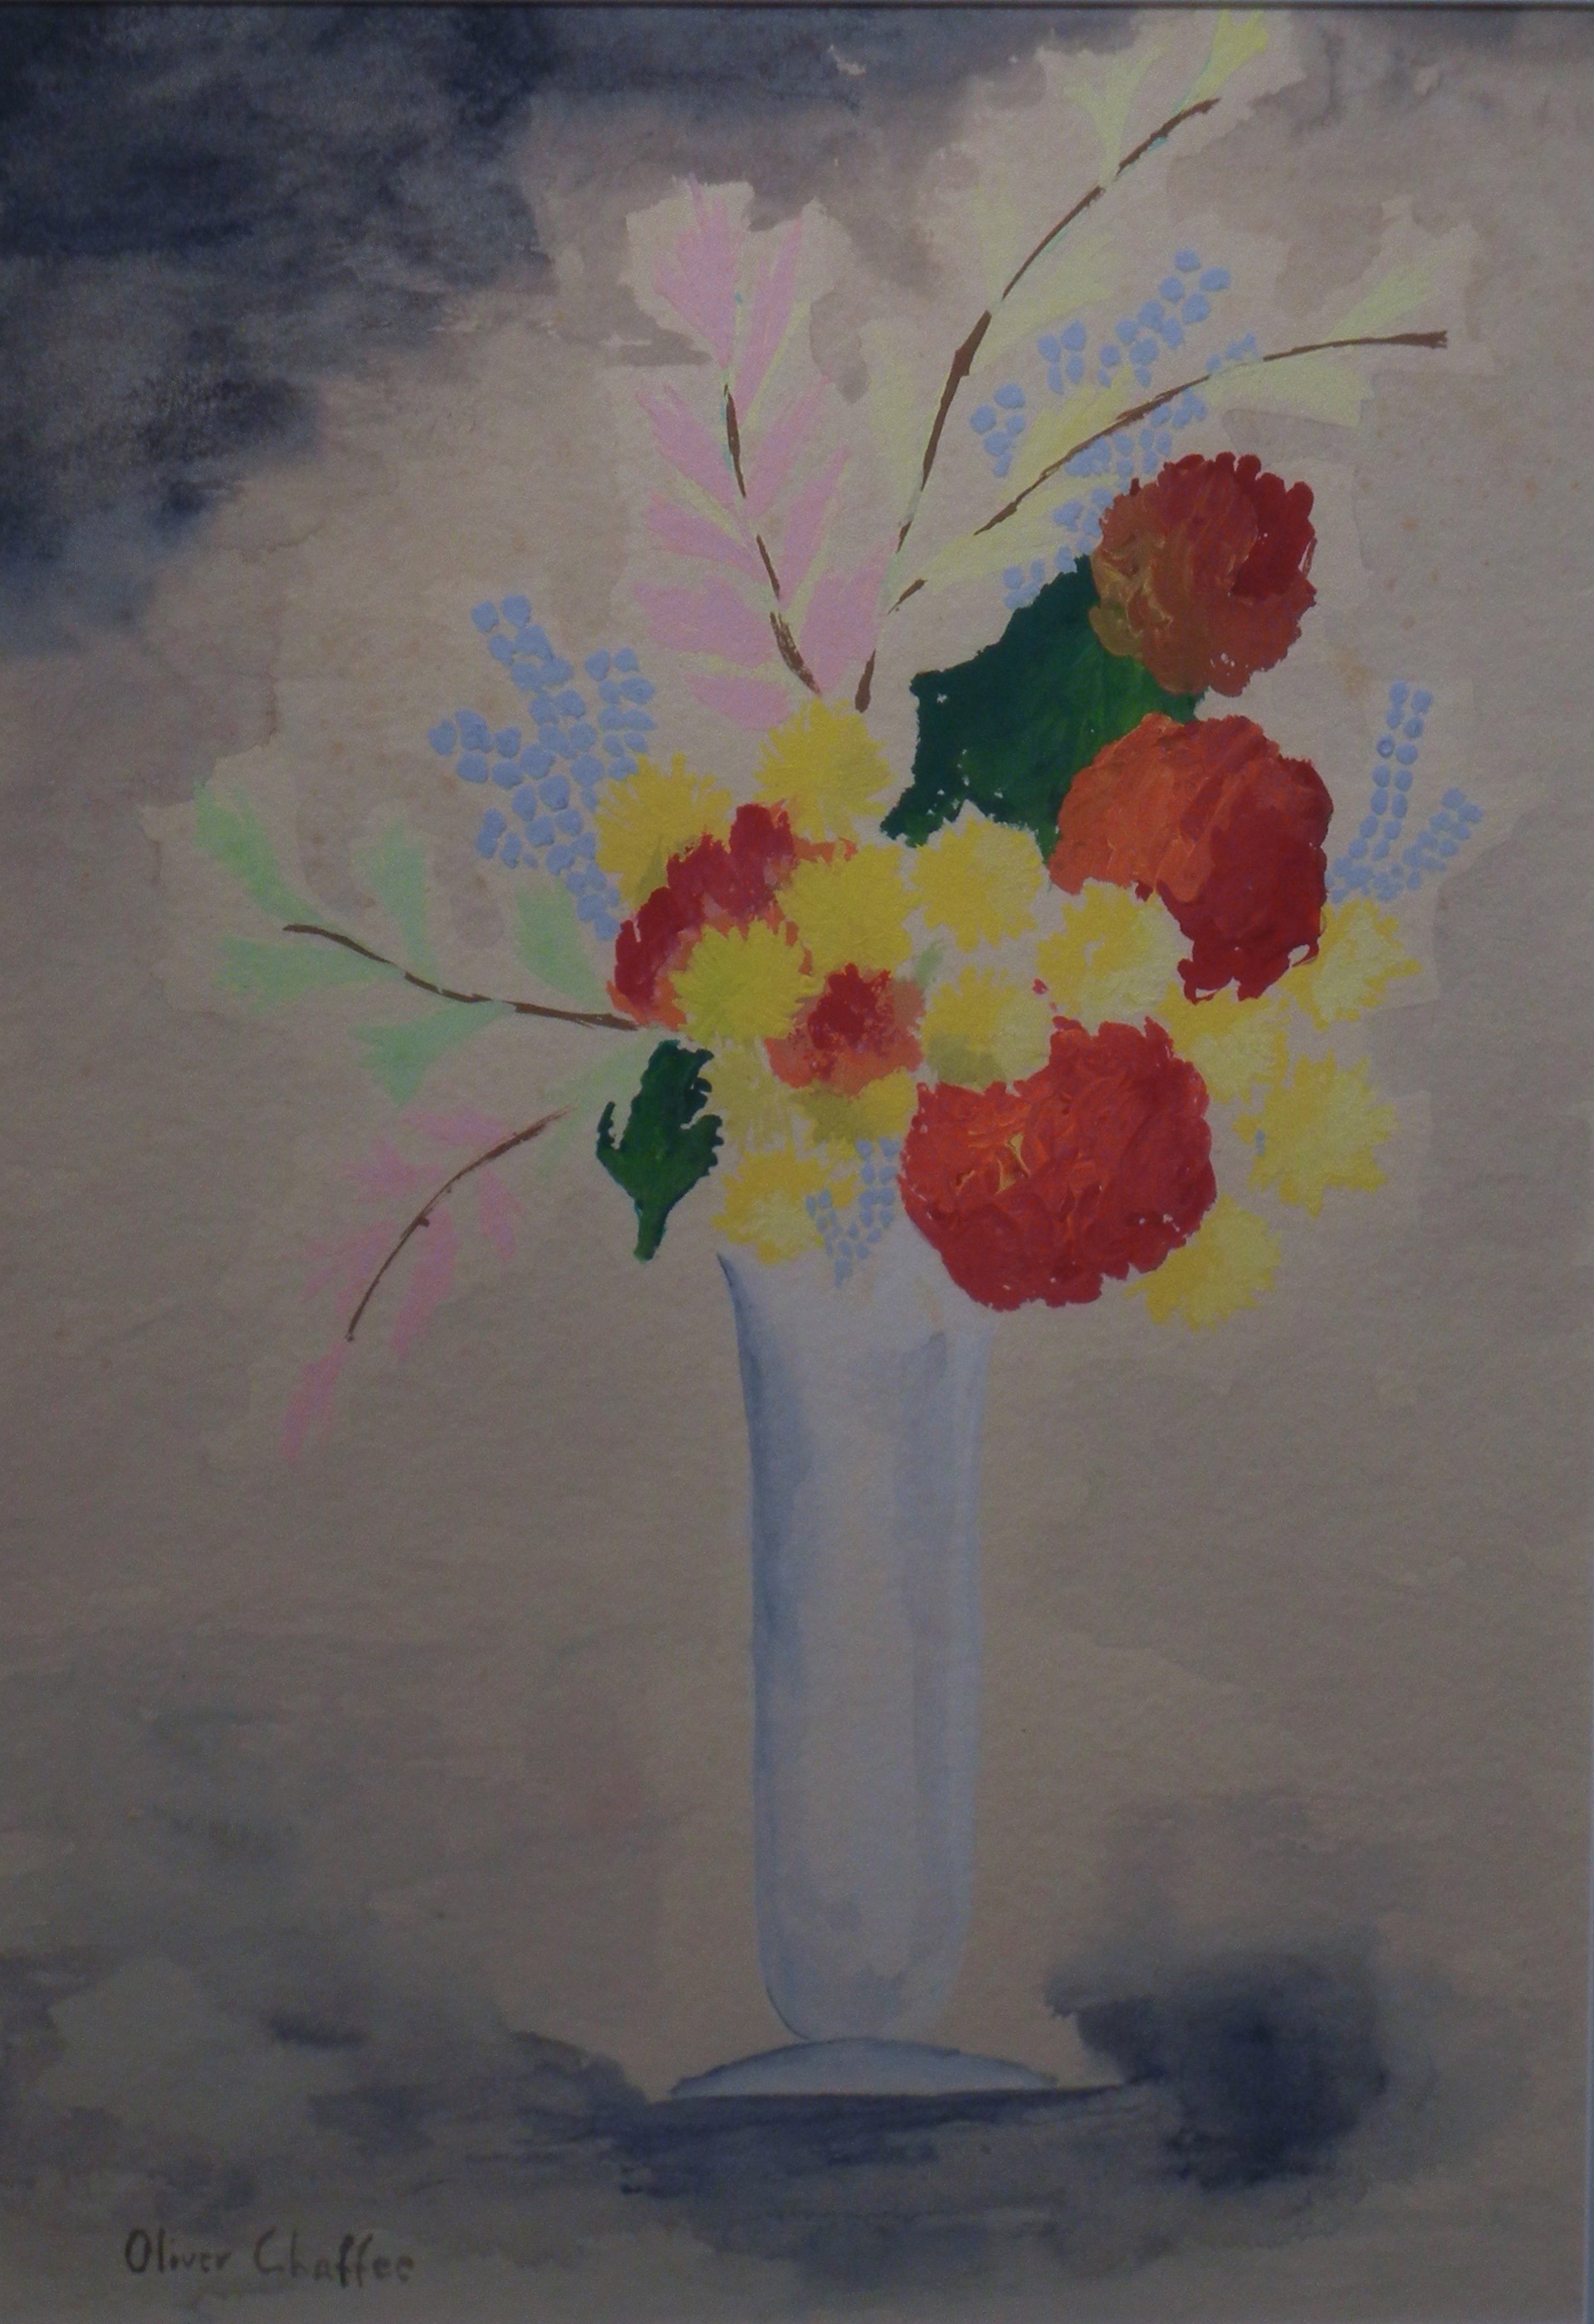 Bouquet by Oliver Chaffee